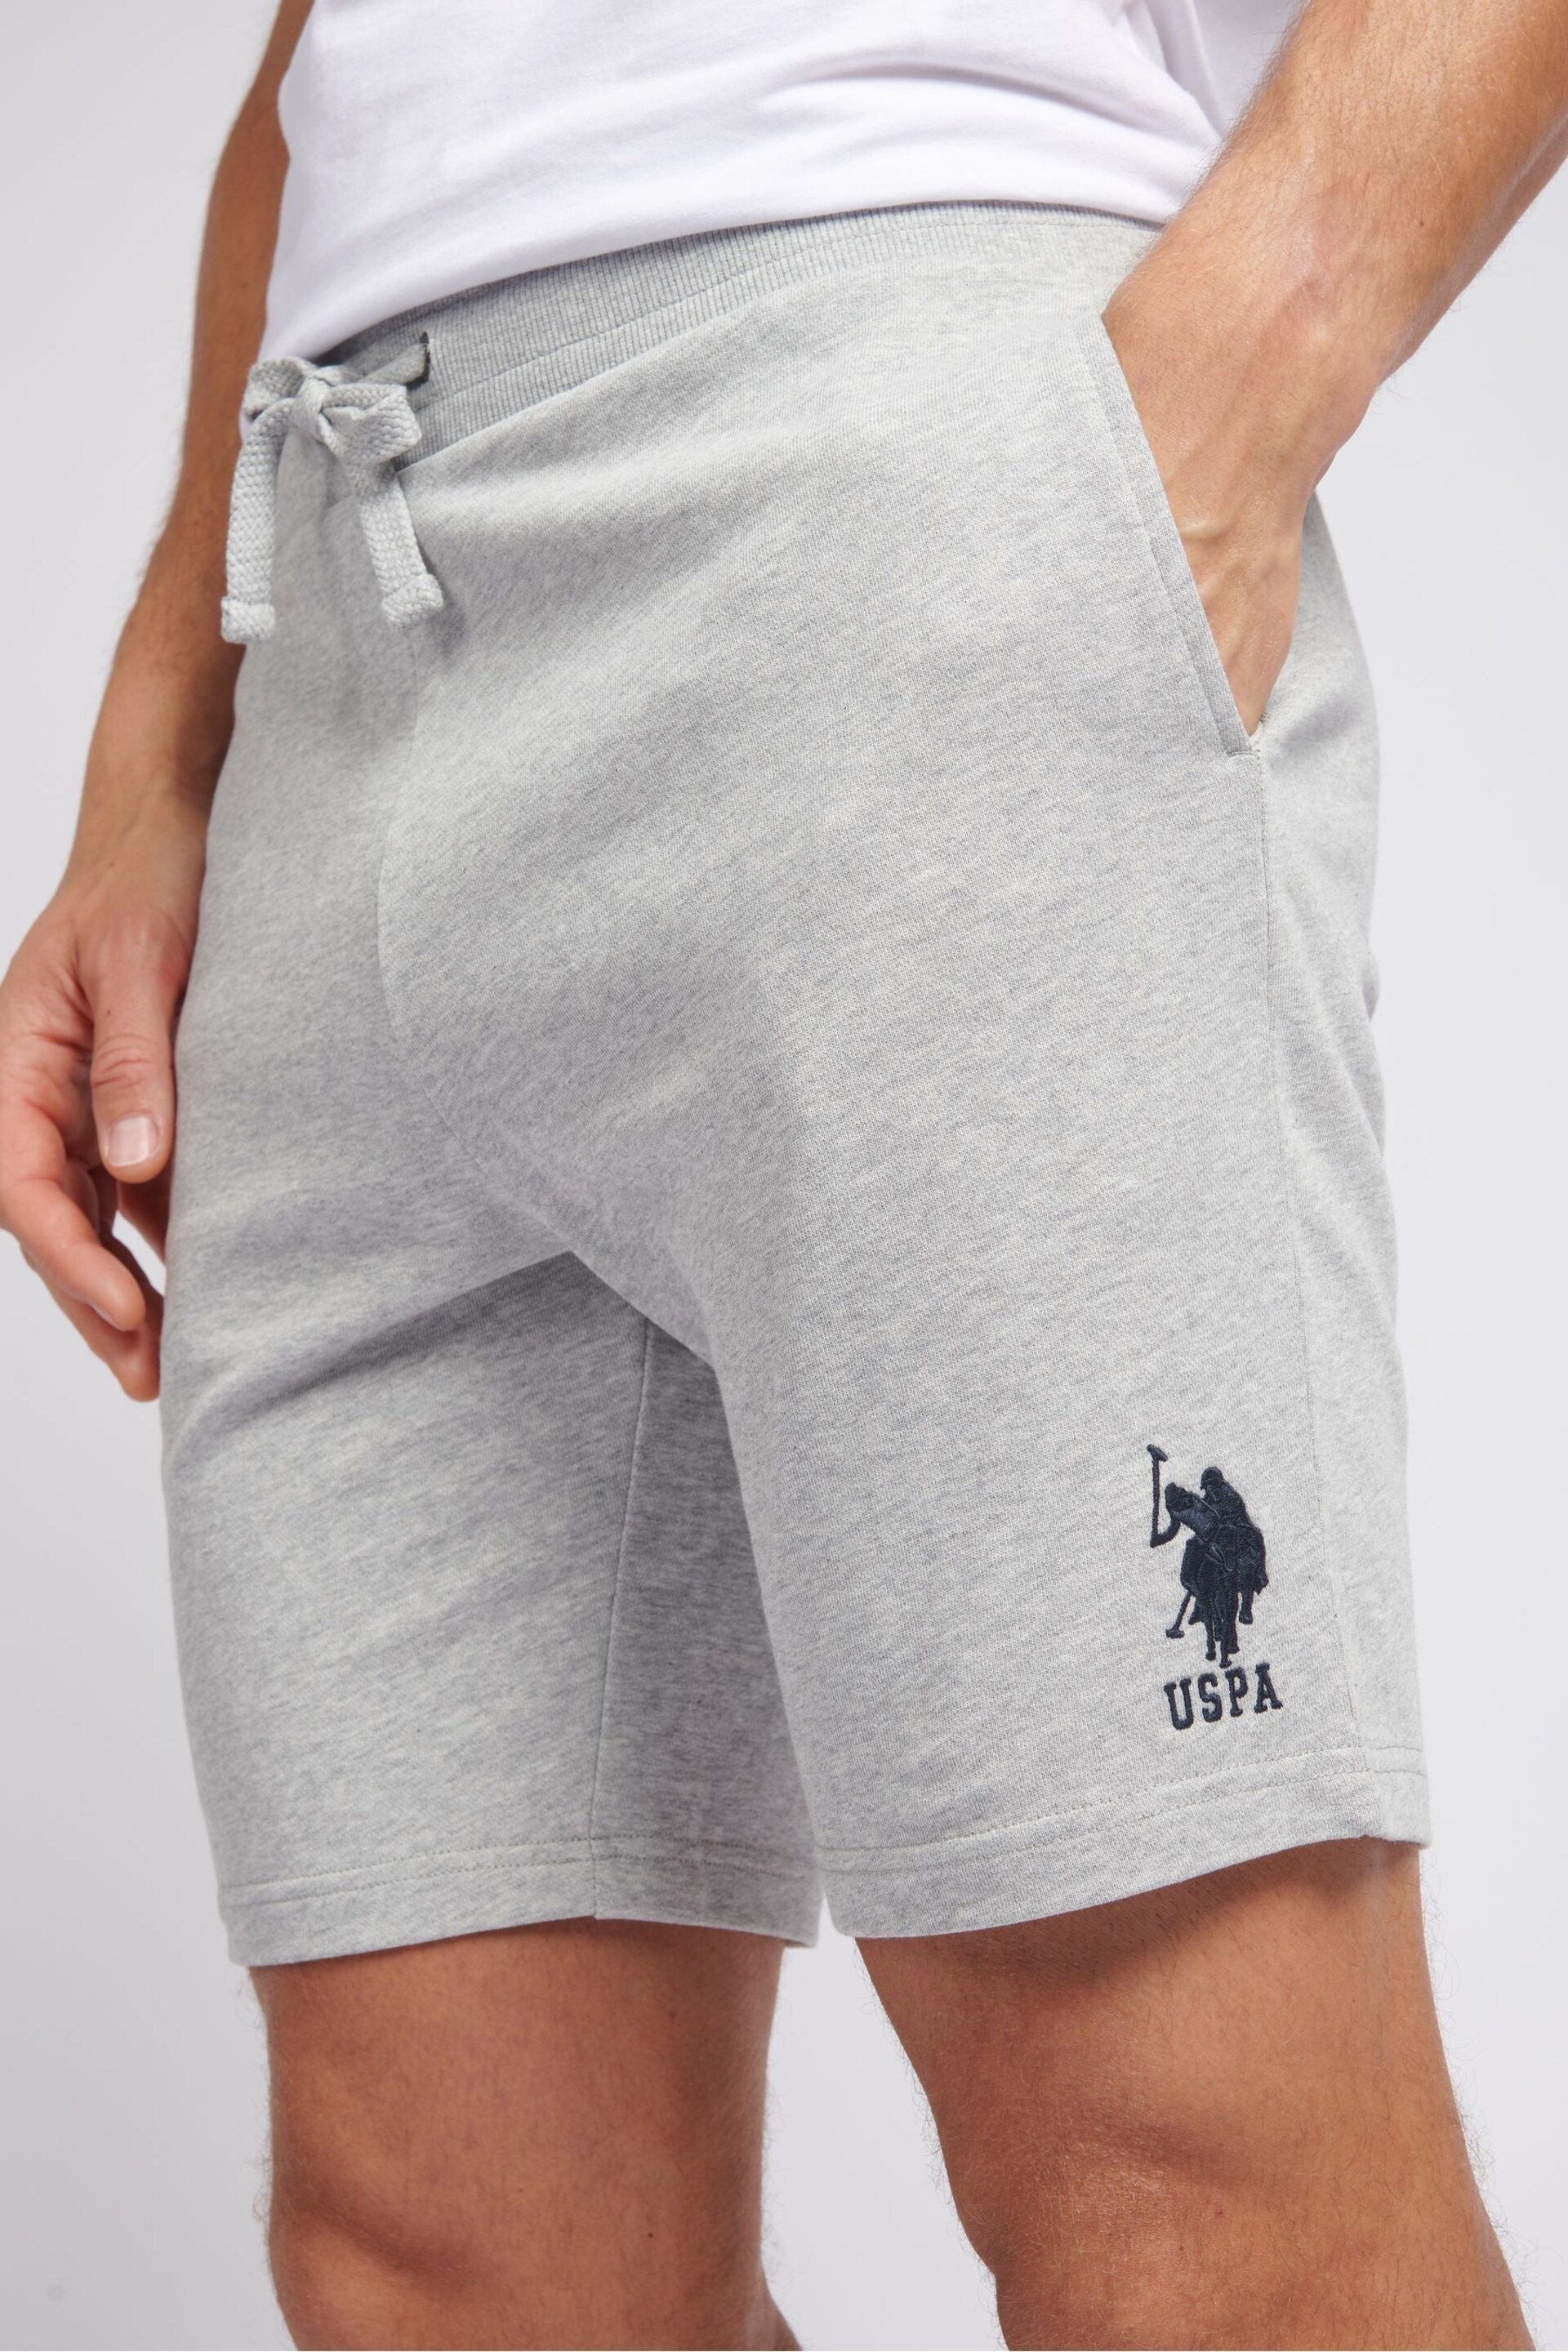 U.S. Polo Assn. Mens Classic Fit Player 3 Sweat Shorts - Image 2 of 9